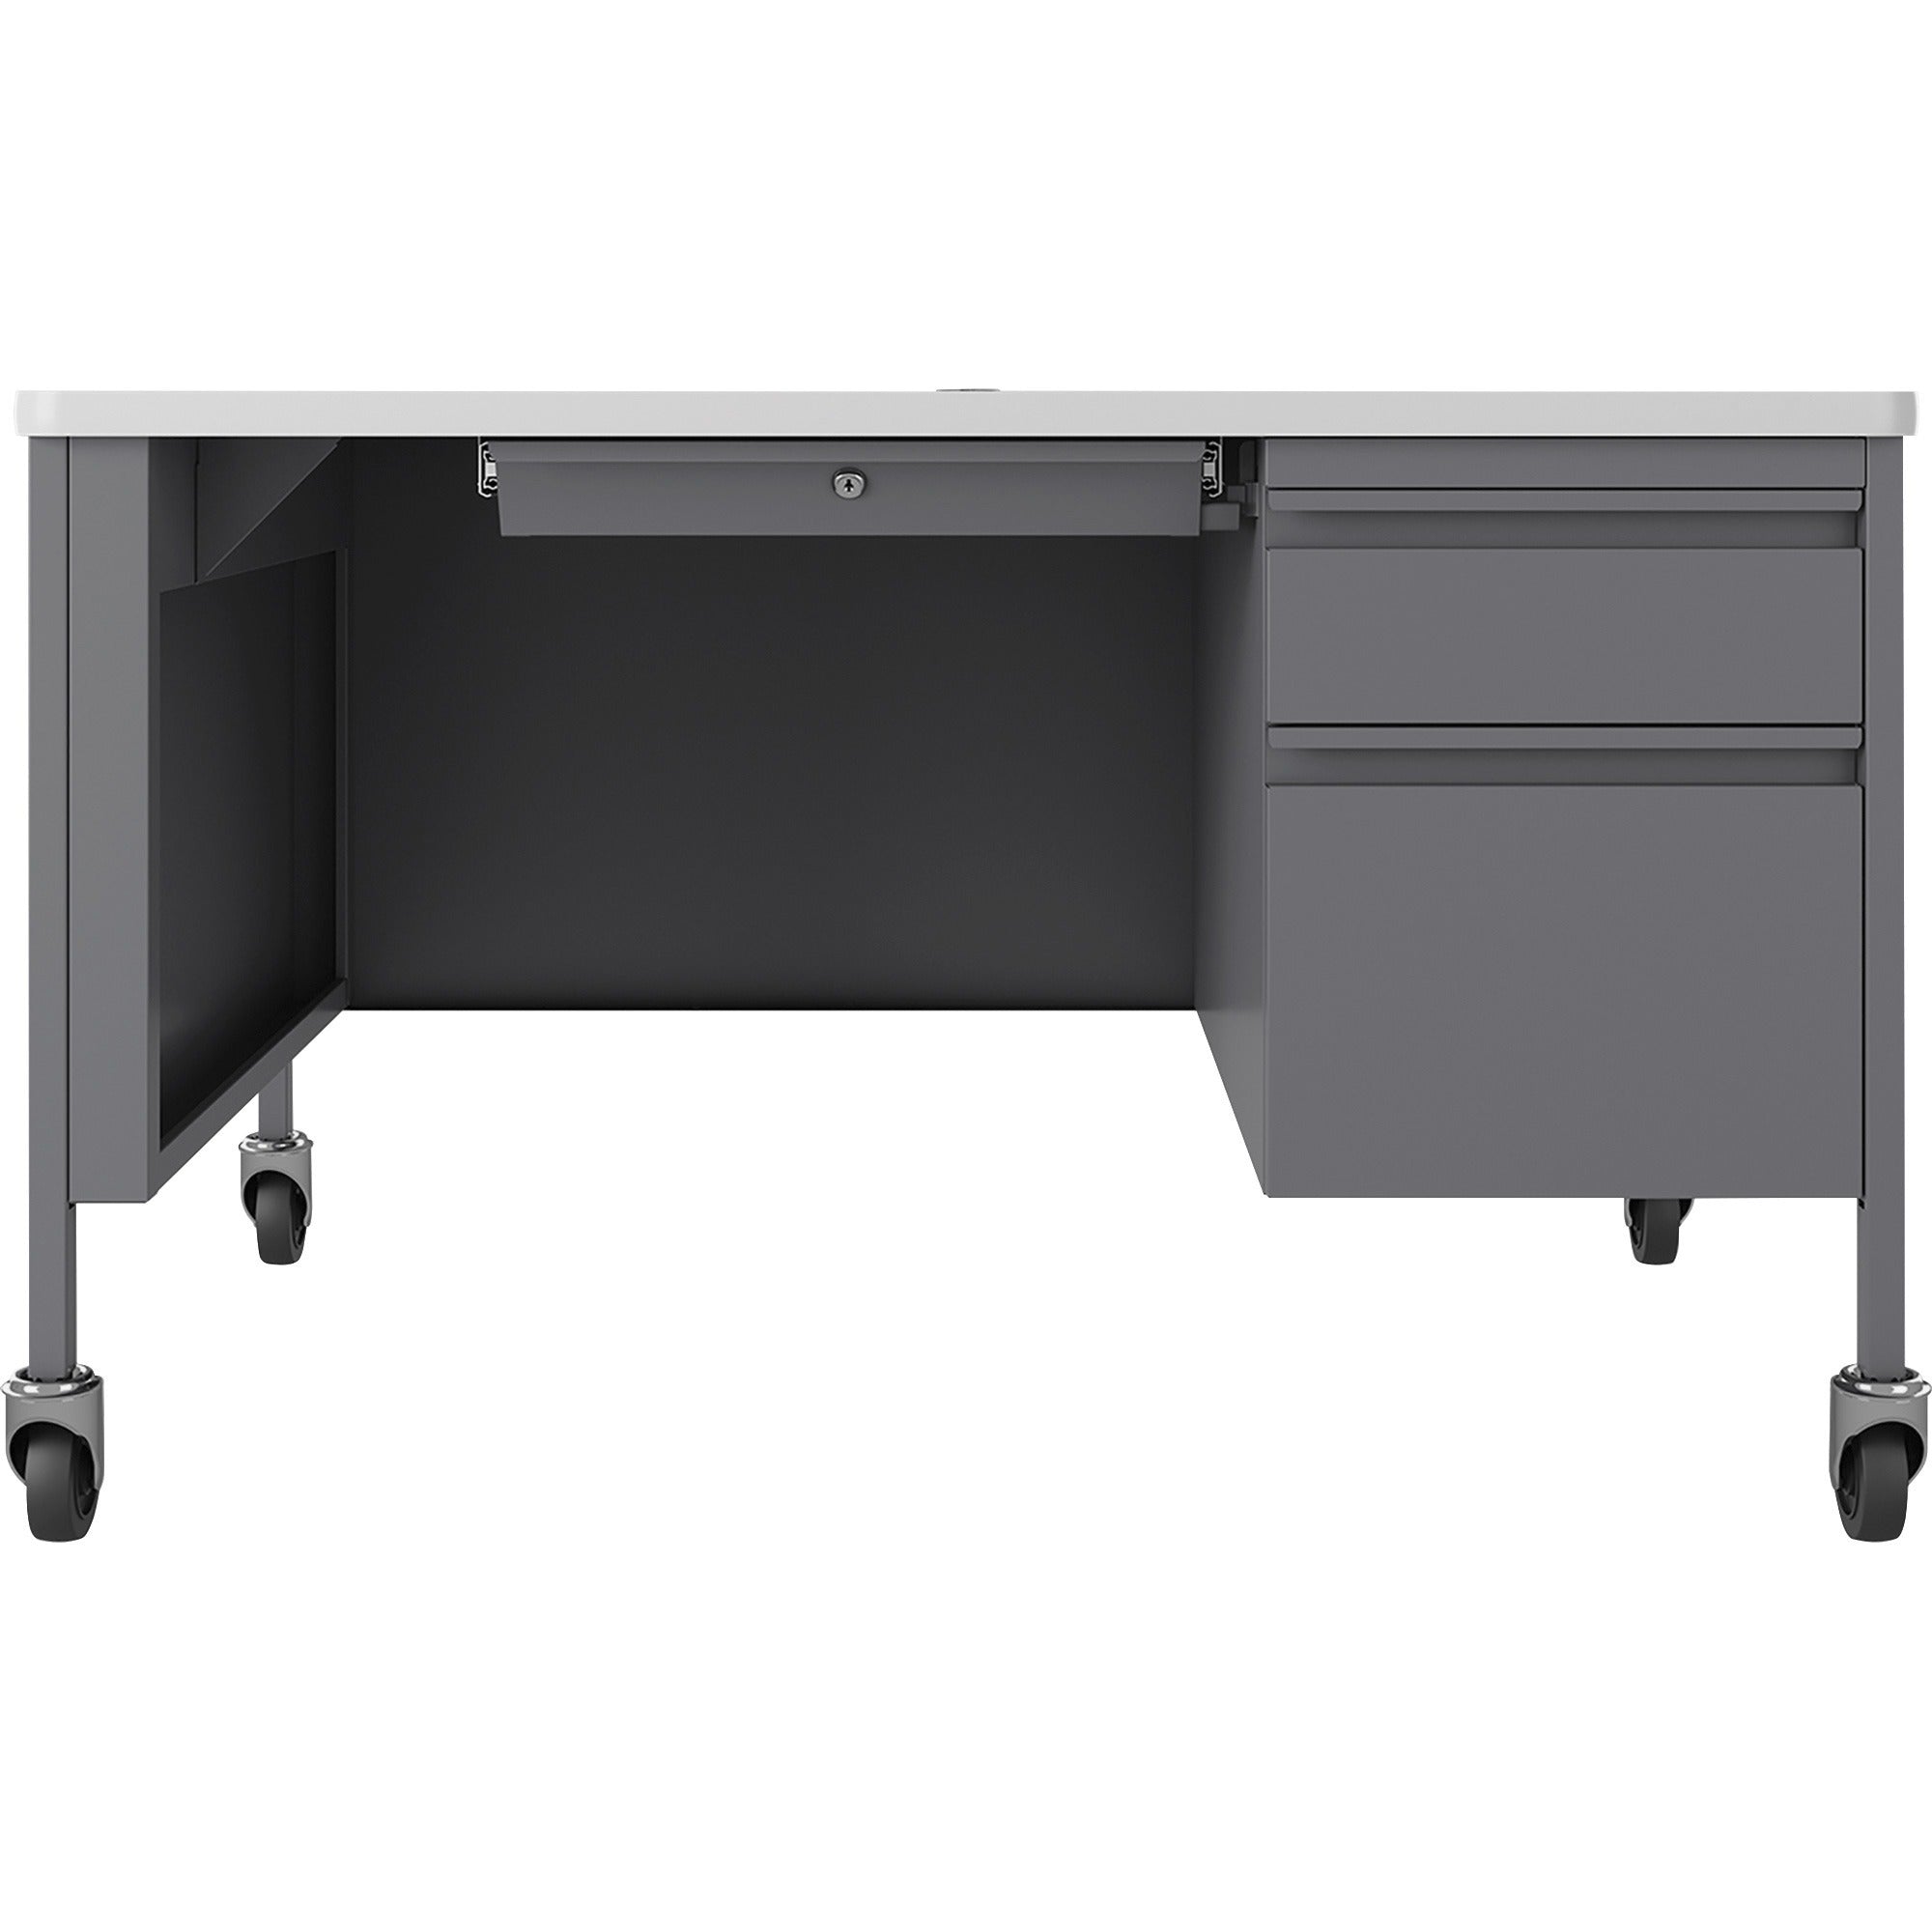 lorell-fortress-series-48-mobile-right-pedestal-teachers-desk-48-x-30295-box-file-drawers-single-pedestal-on-right-side-t-mold-edge-finish-gray_llr66944 - 2